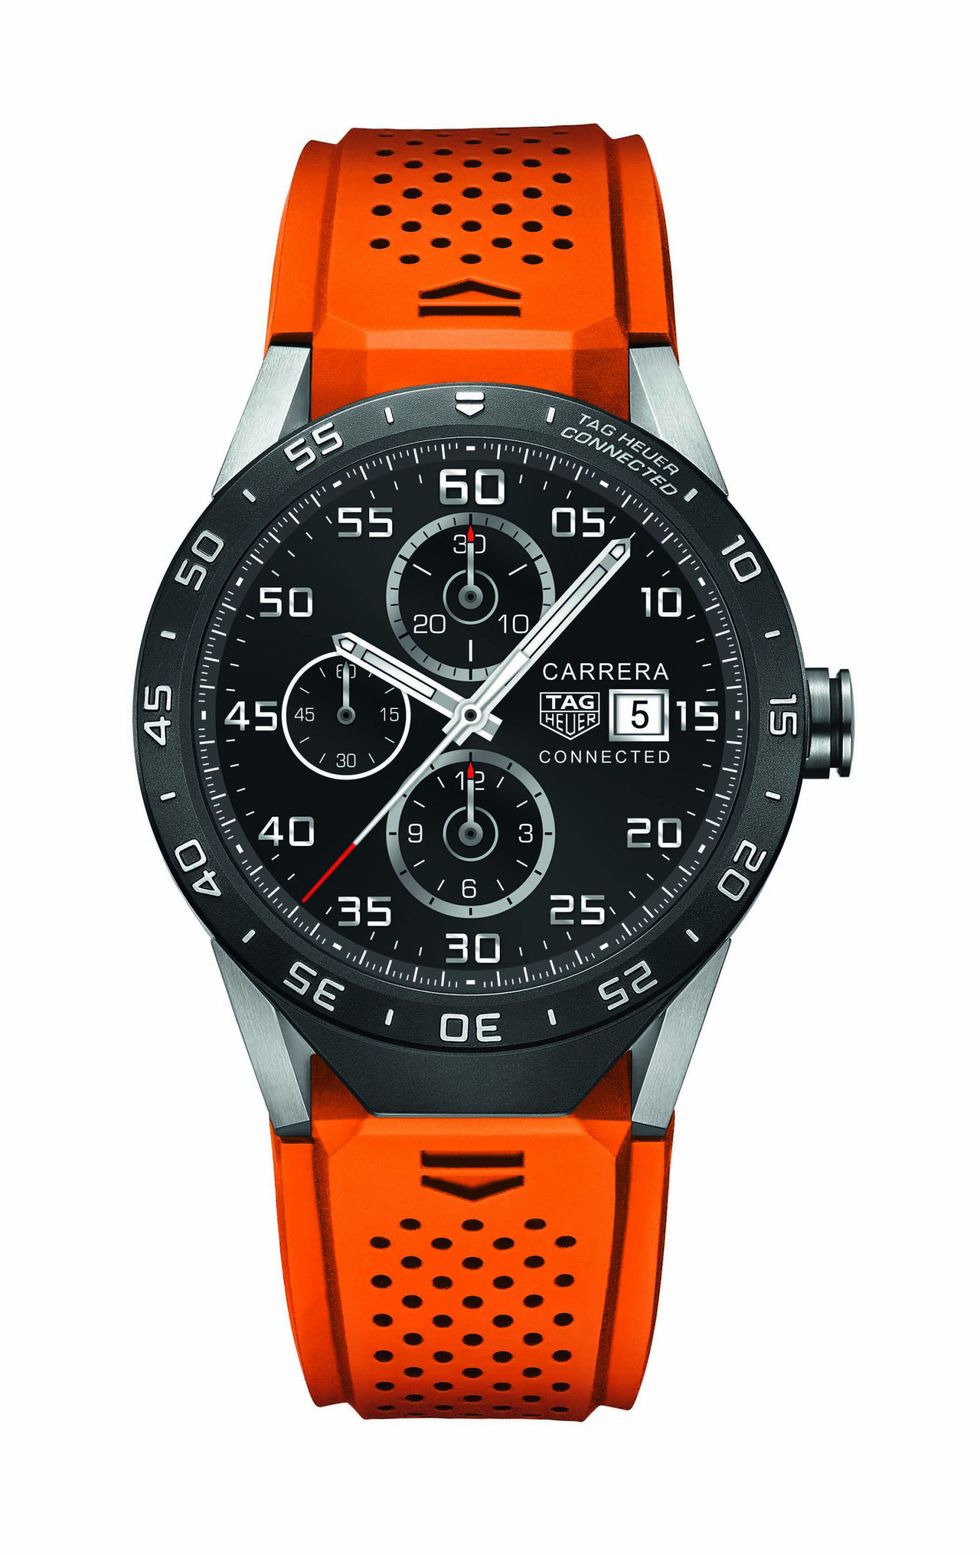 Product, Analog watch, Brown, Watch, Glass, Orange, Electronic device, Red, Technology, Fashion accessory, 